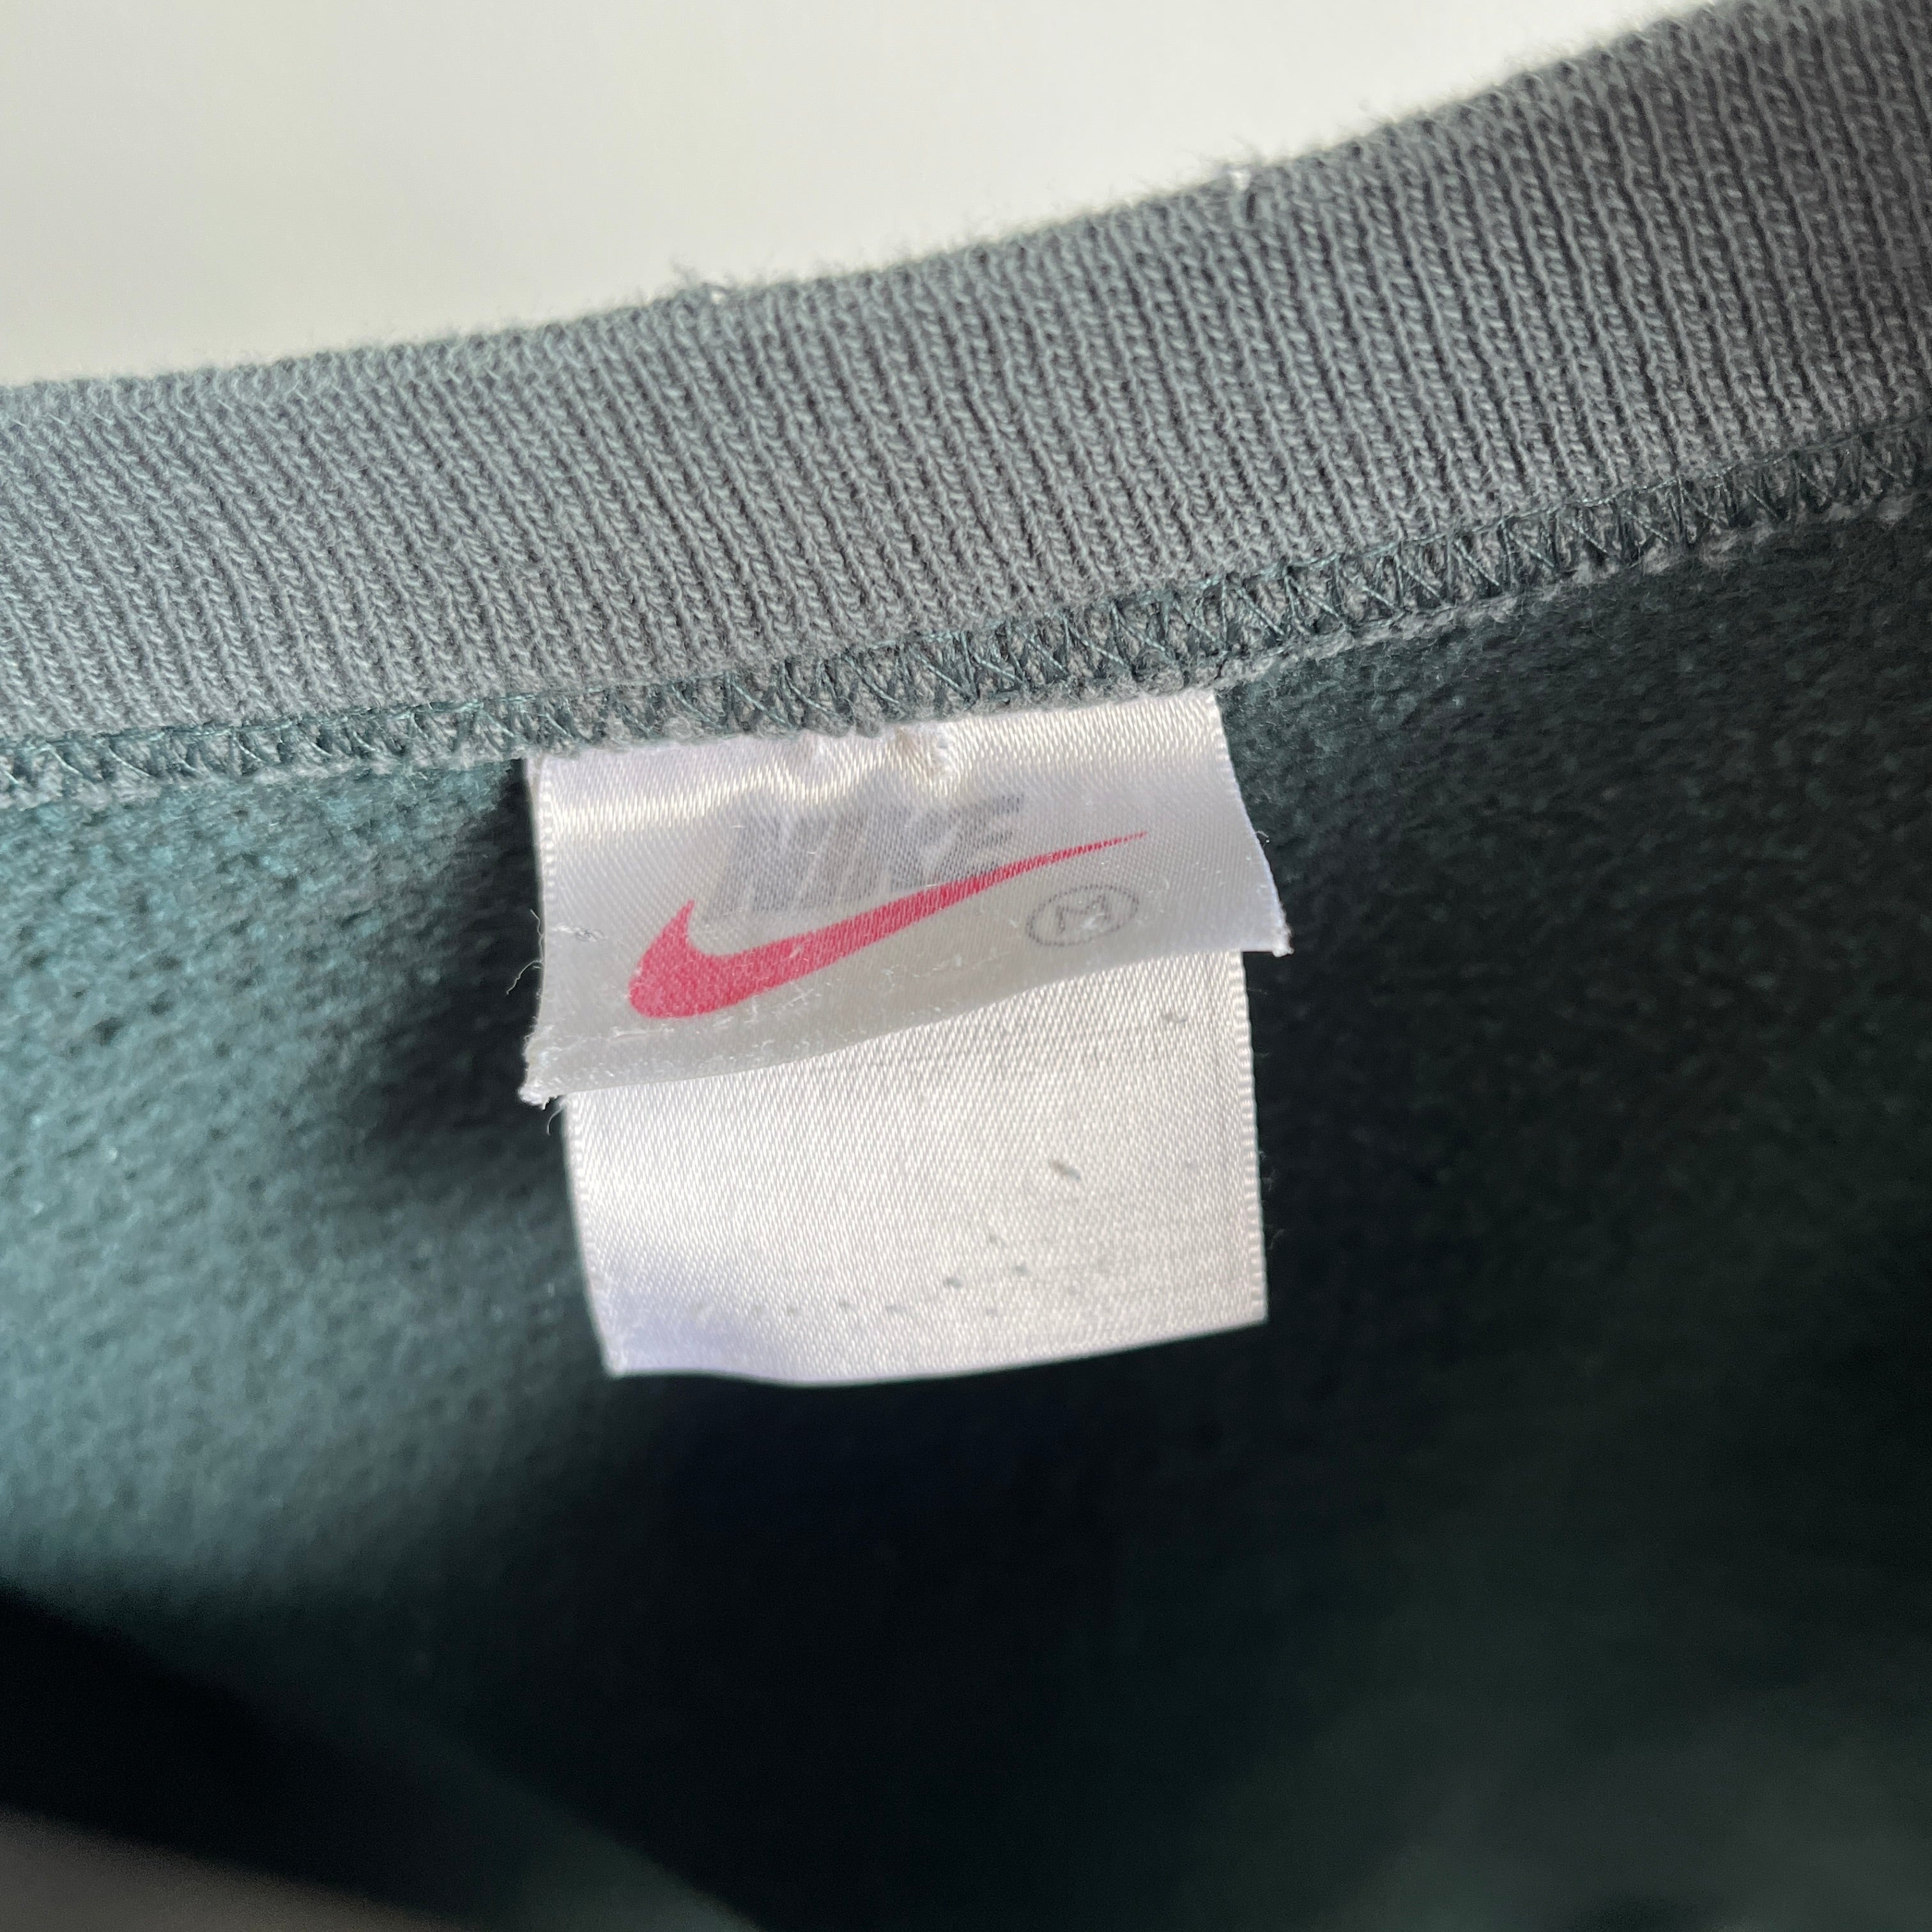 1990s Tattered Torn and Worn Faded Green Destroyed Nike Sweatshirt